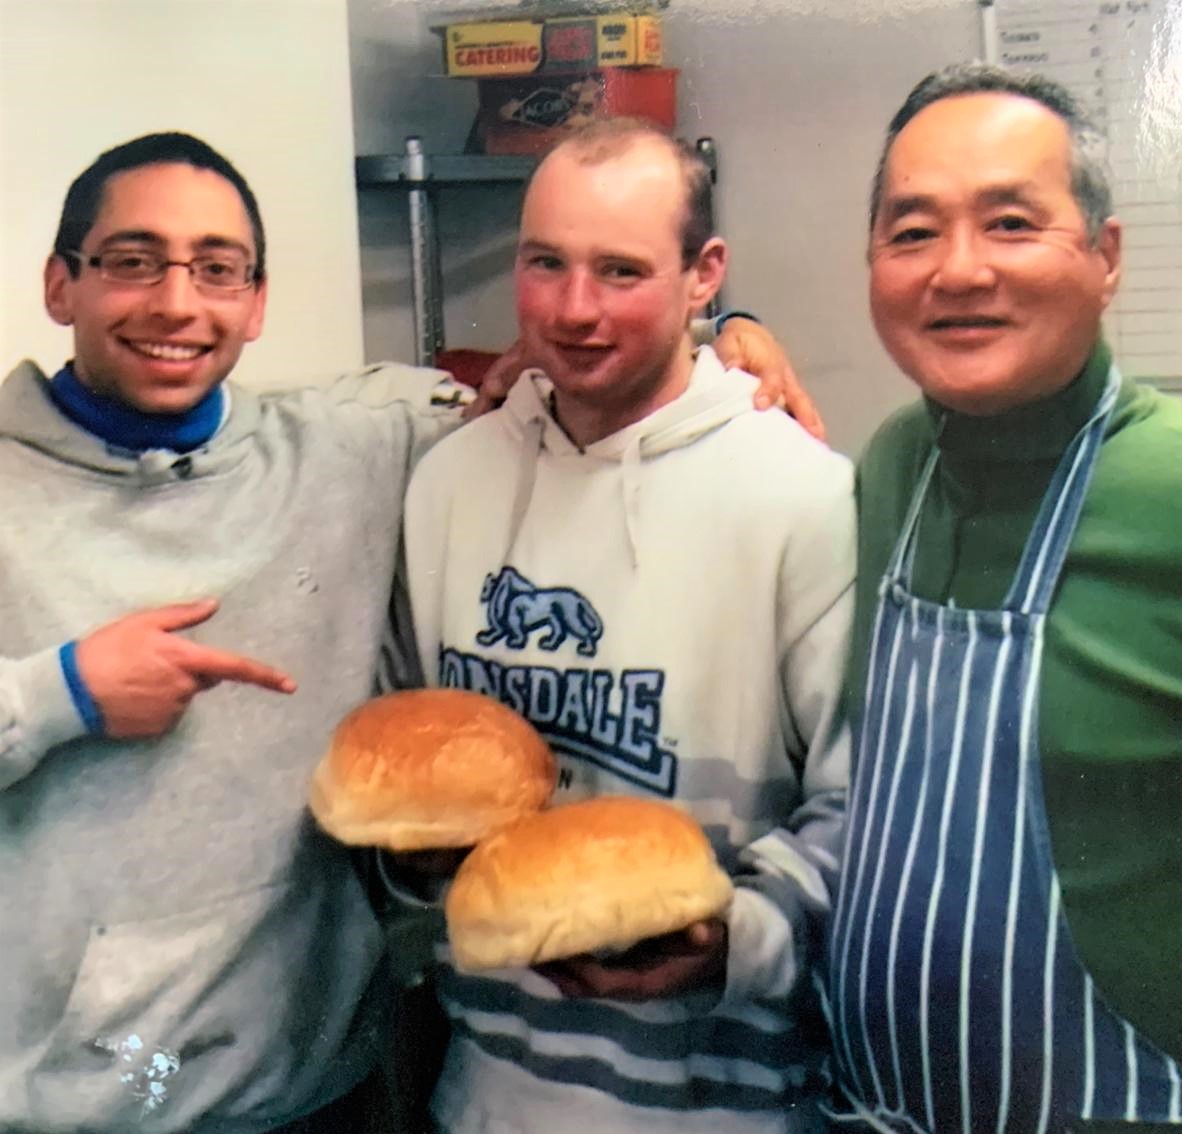 Years spent in kitchens across Europe helped Lim (right) hone his baking skills which he now puts to good use at THH.